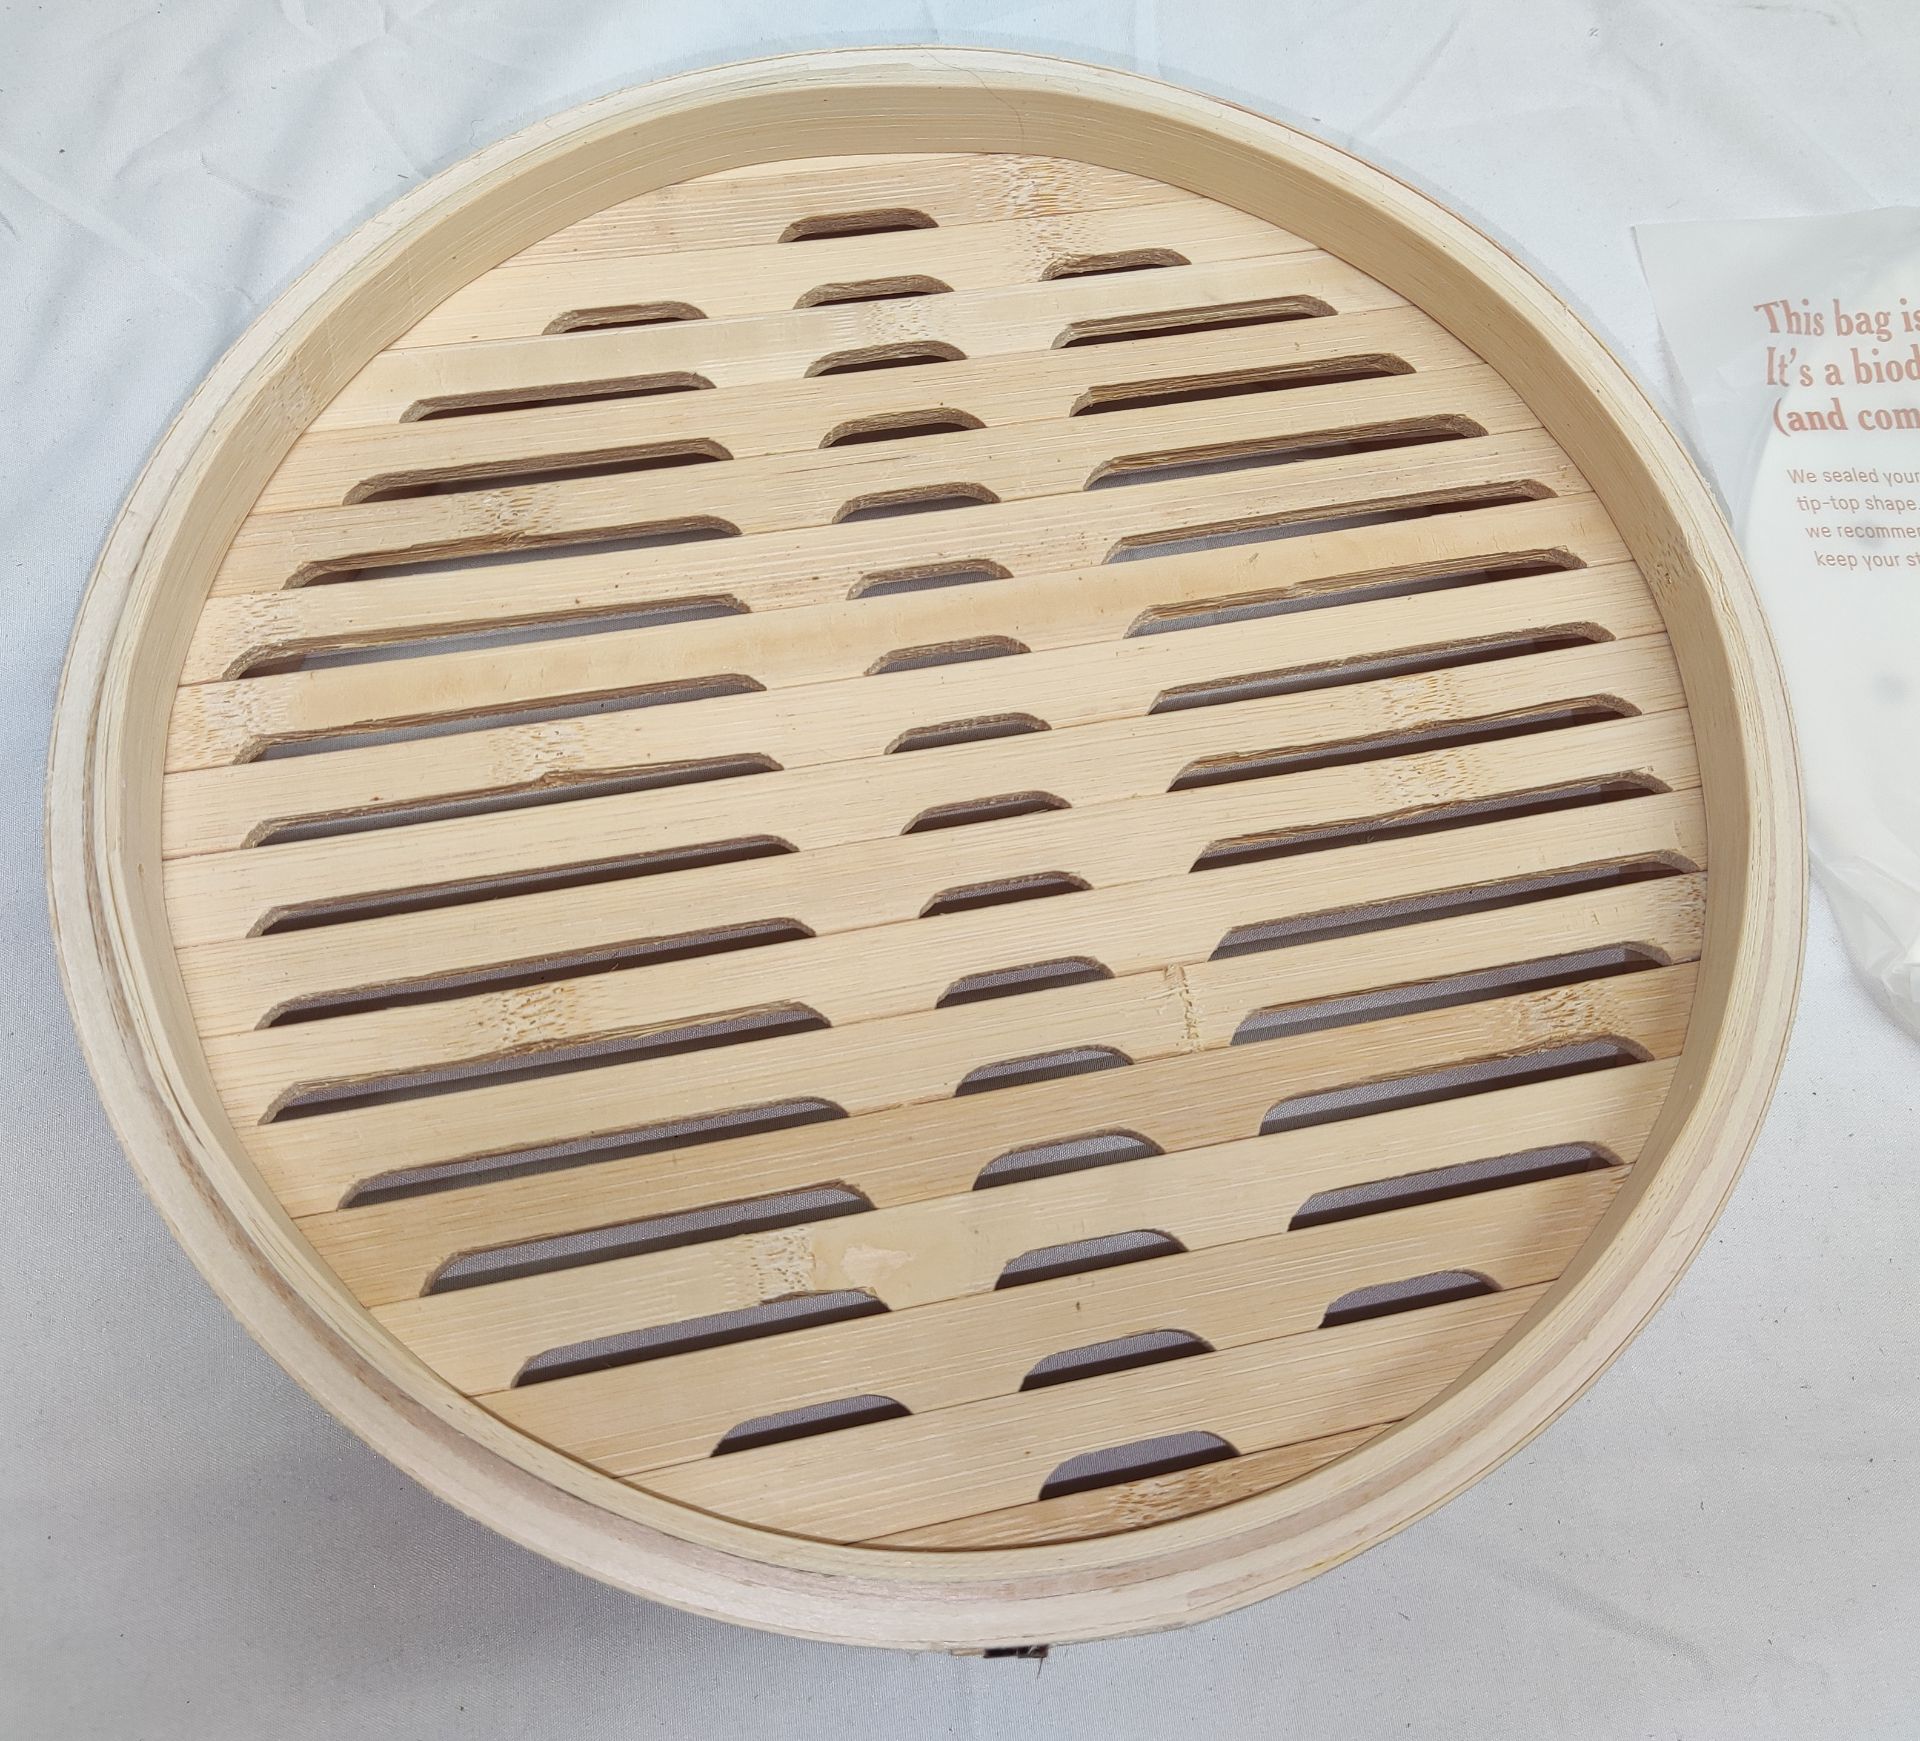 1 x OUR PLACE Single Spruce Steamer Natural 10.25" - Boxed - Original RRP £25 - Ref: 7397126/ - Image 9 of 13